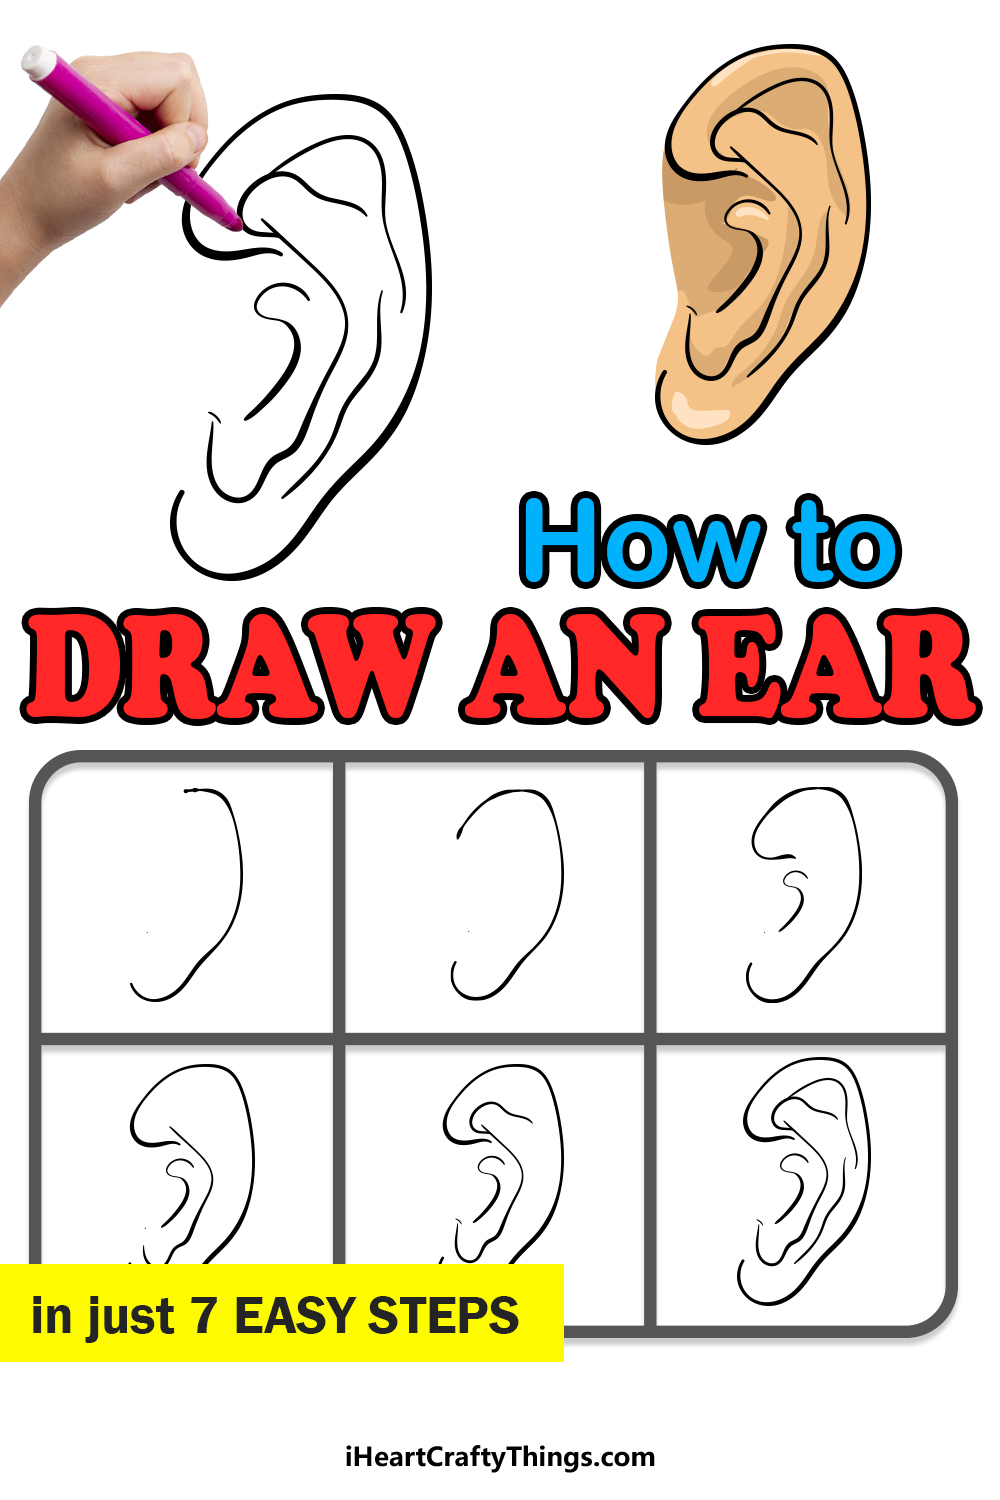 how to draw an ear in 7 easy steps